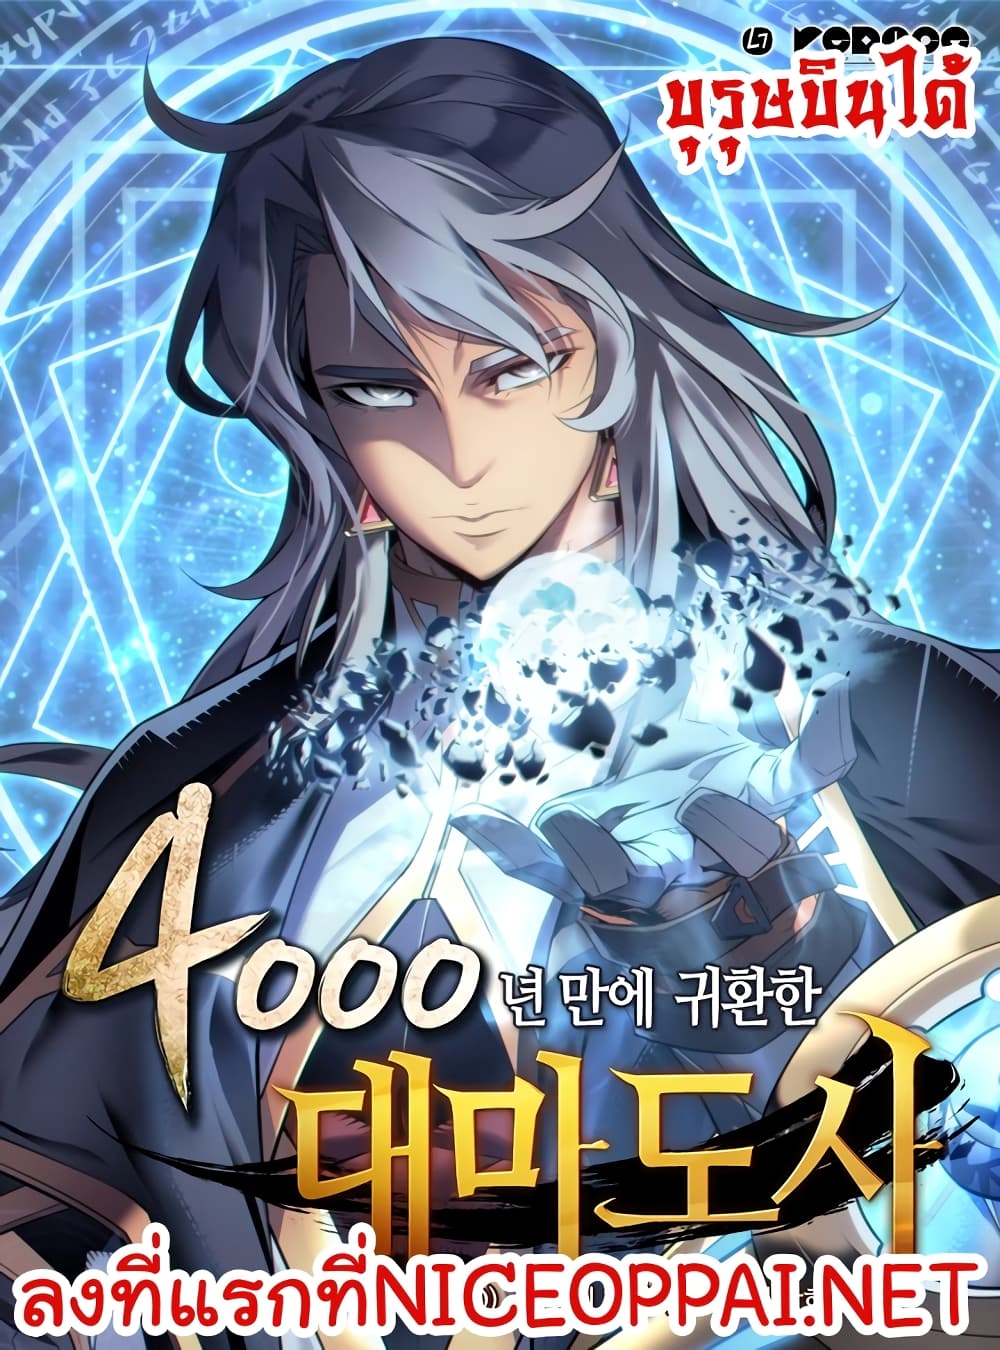 The Great Mage Returns After 4000 Years 35 (1)